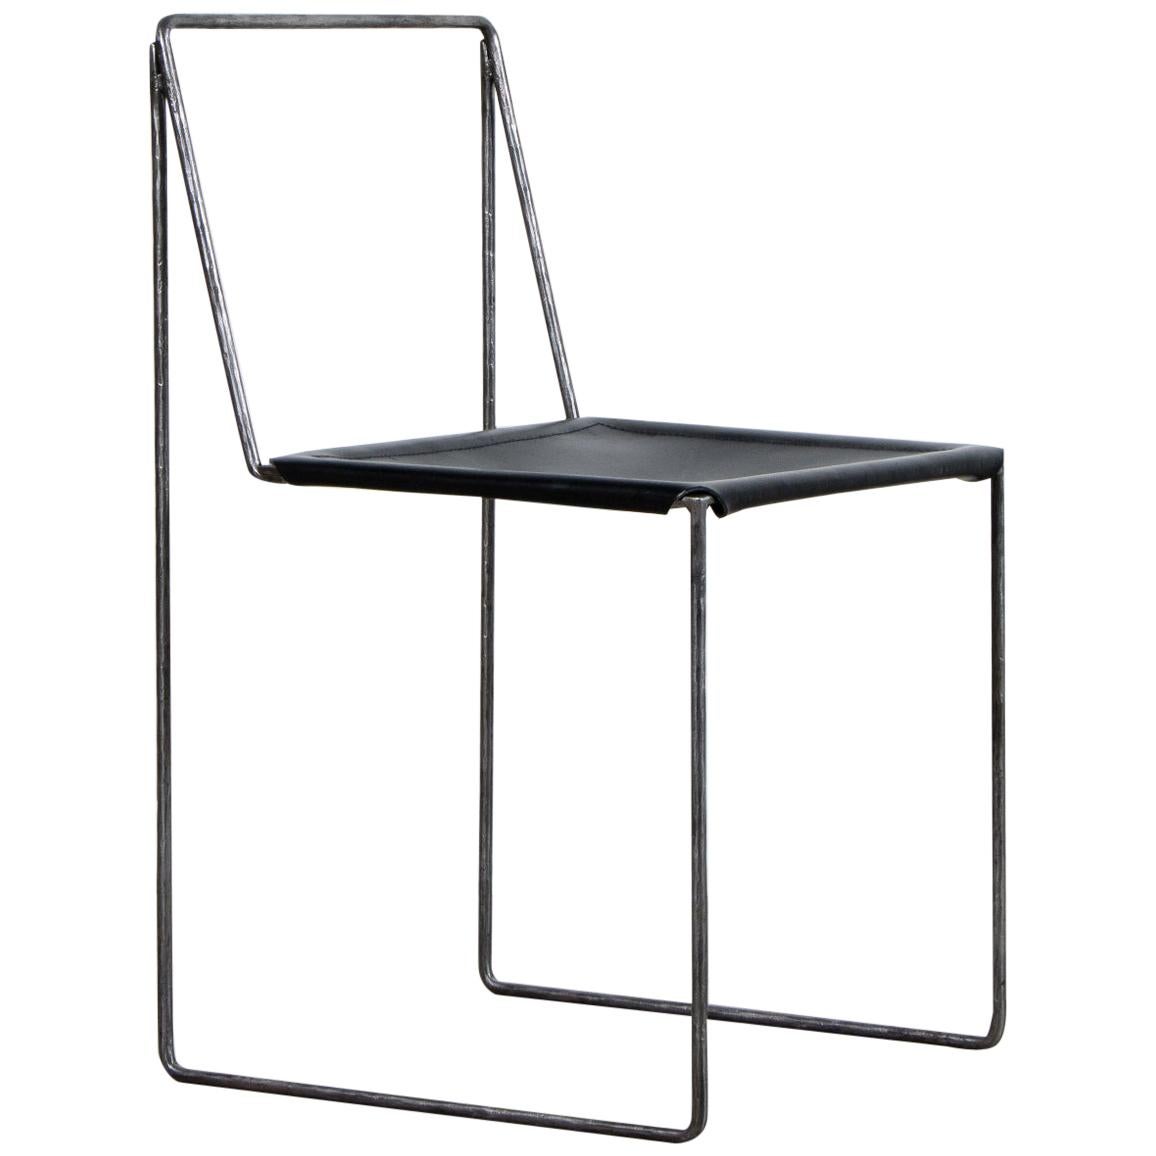 Stal Chair by Lucas Tyra Morten For Sale